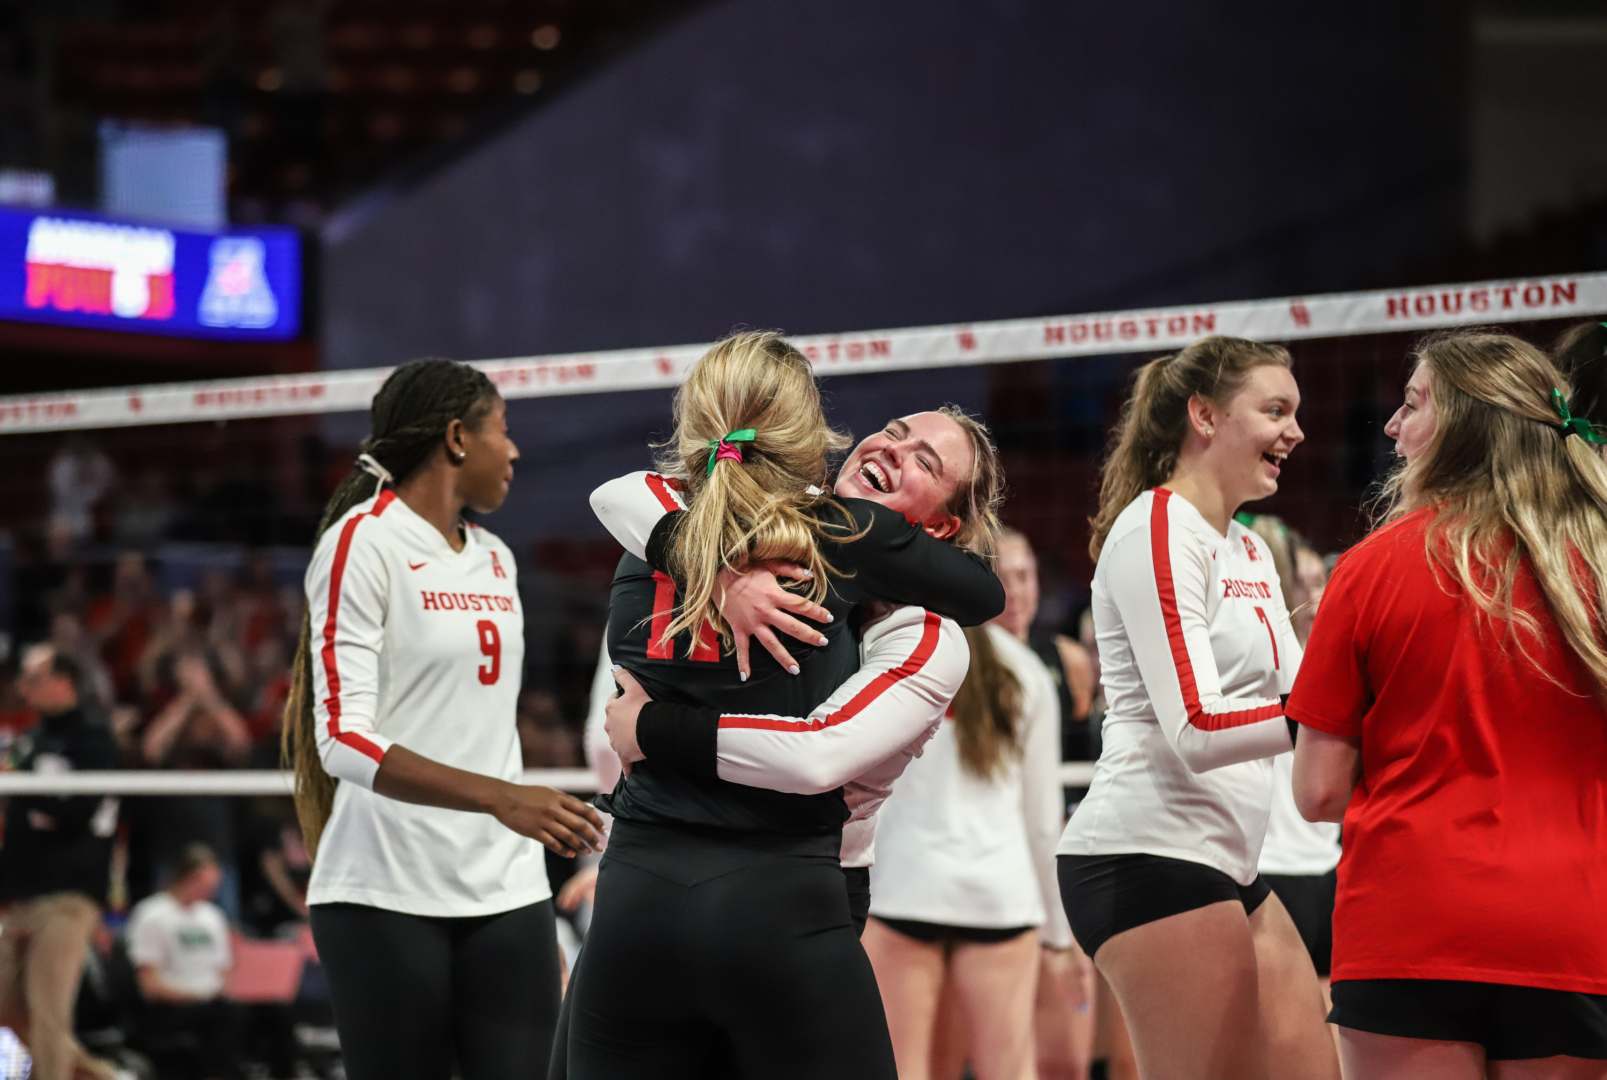 Kate Georgiades and Annie Cooke embrace after UH volleyball upset N0. 23 UCF for the program's first win over a ranked opponent since 2003. | Sean Thomas/The Cougar